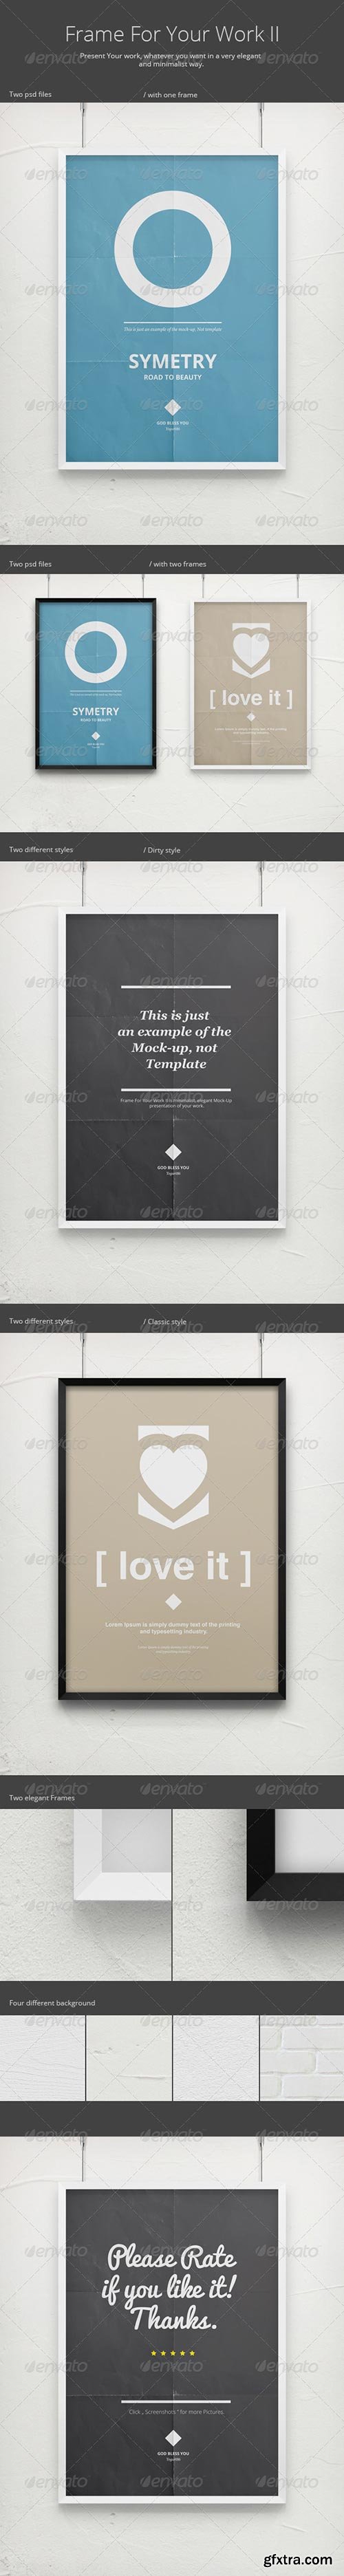 Graphicriver - Frame For Your Work 2 - Poster Mock-Up 2800509